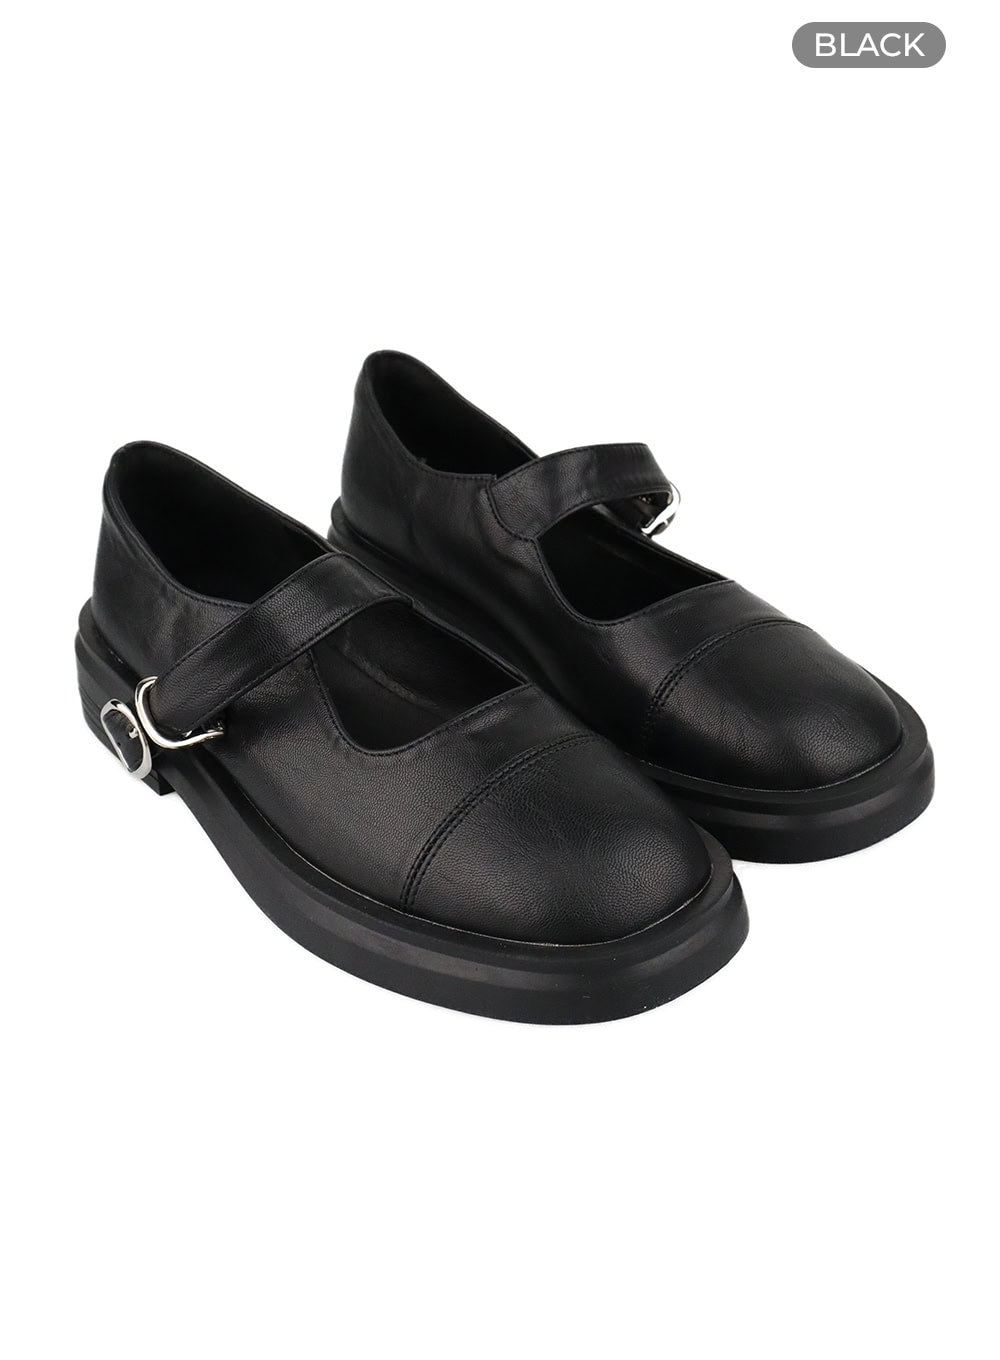 mary-jane-loafers-oy413 / Black